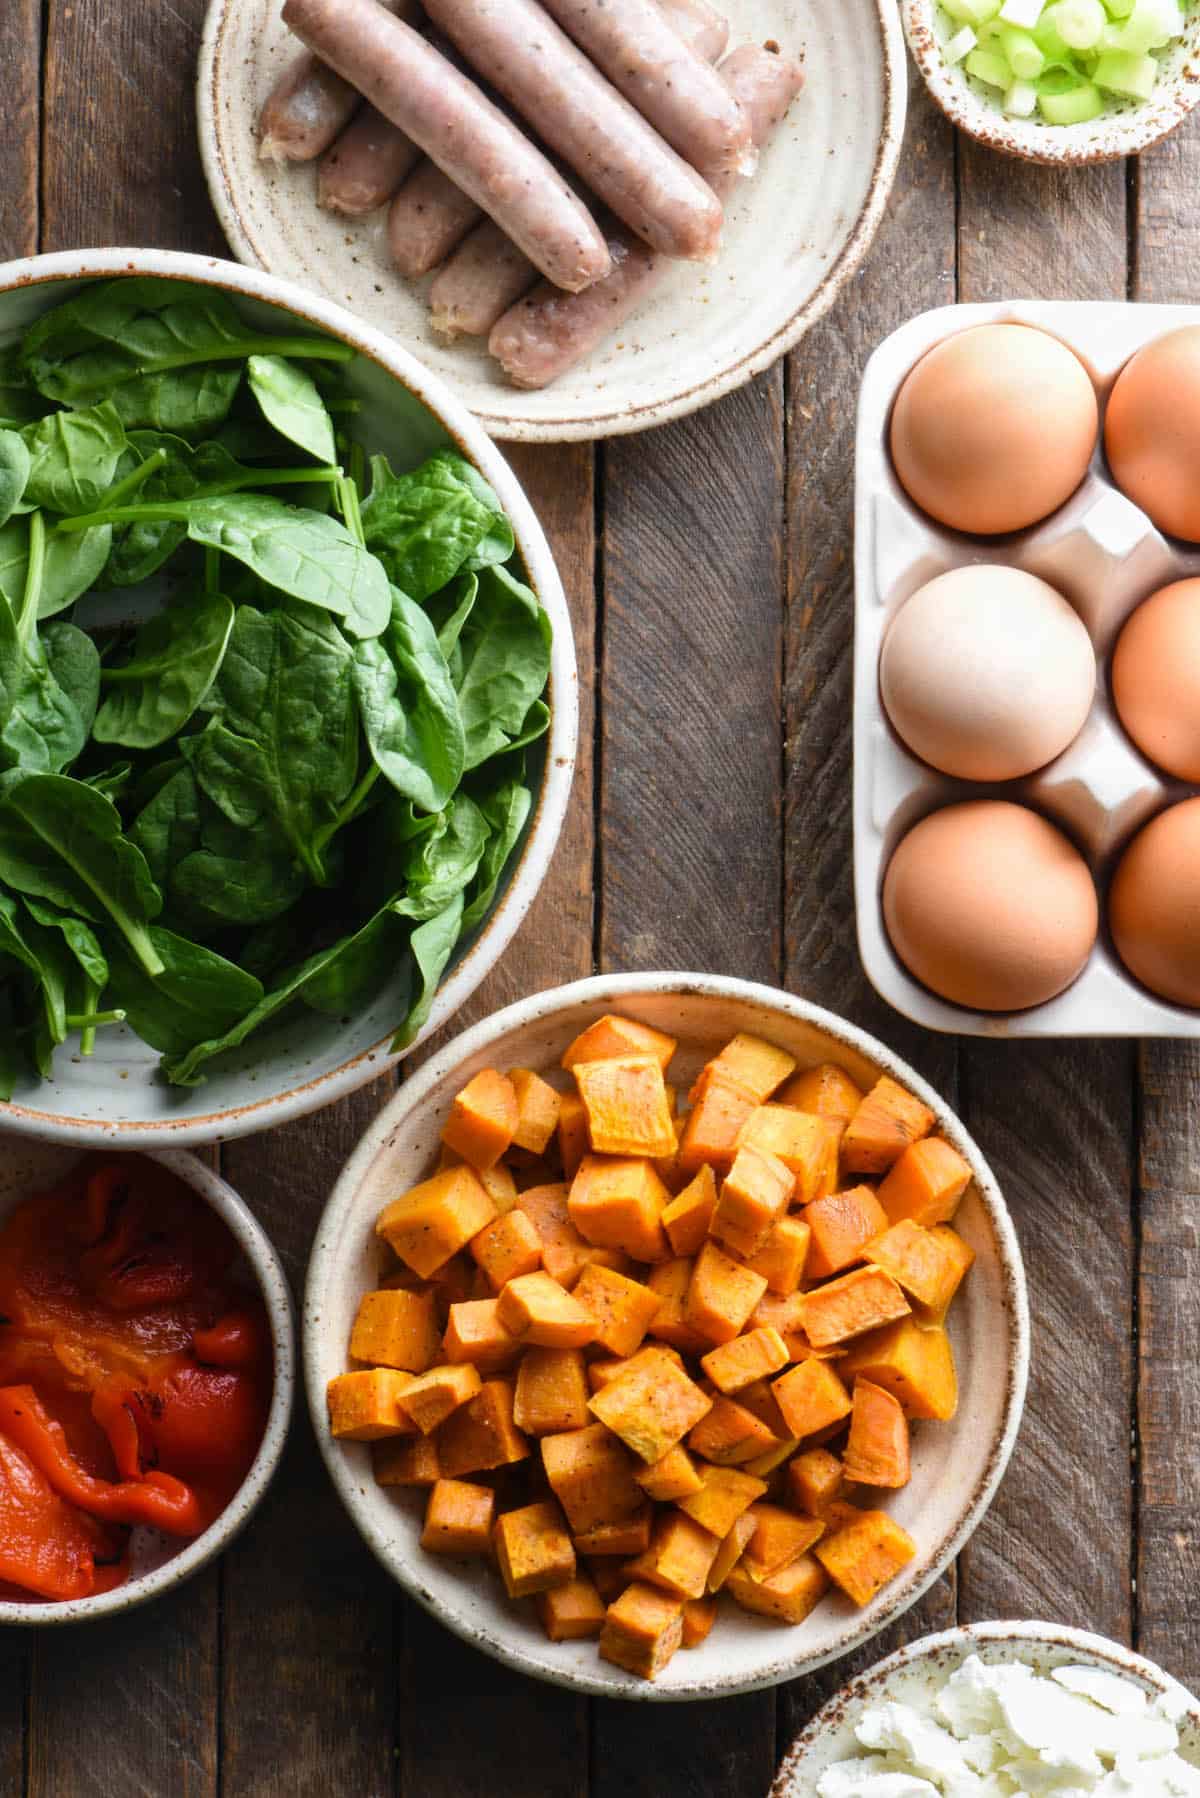 The ingredients needed for a sweet potato breakfast recipe laid out on a wooden surface, including brown eggs, spinach, sausage, sweet potatoes, cheese and red peppers.